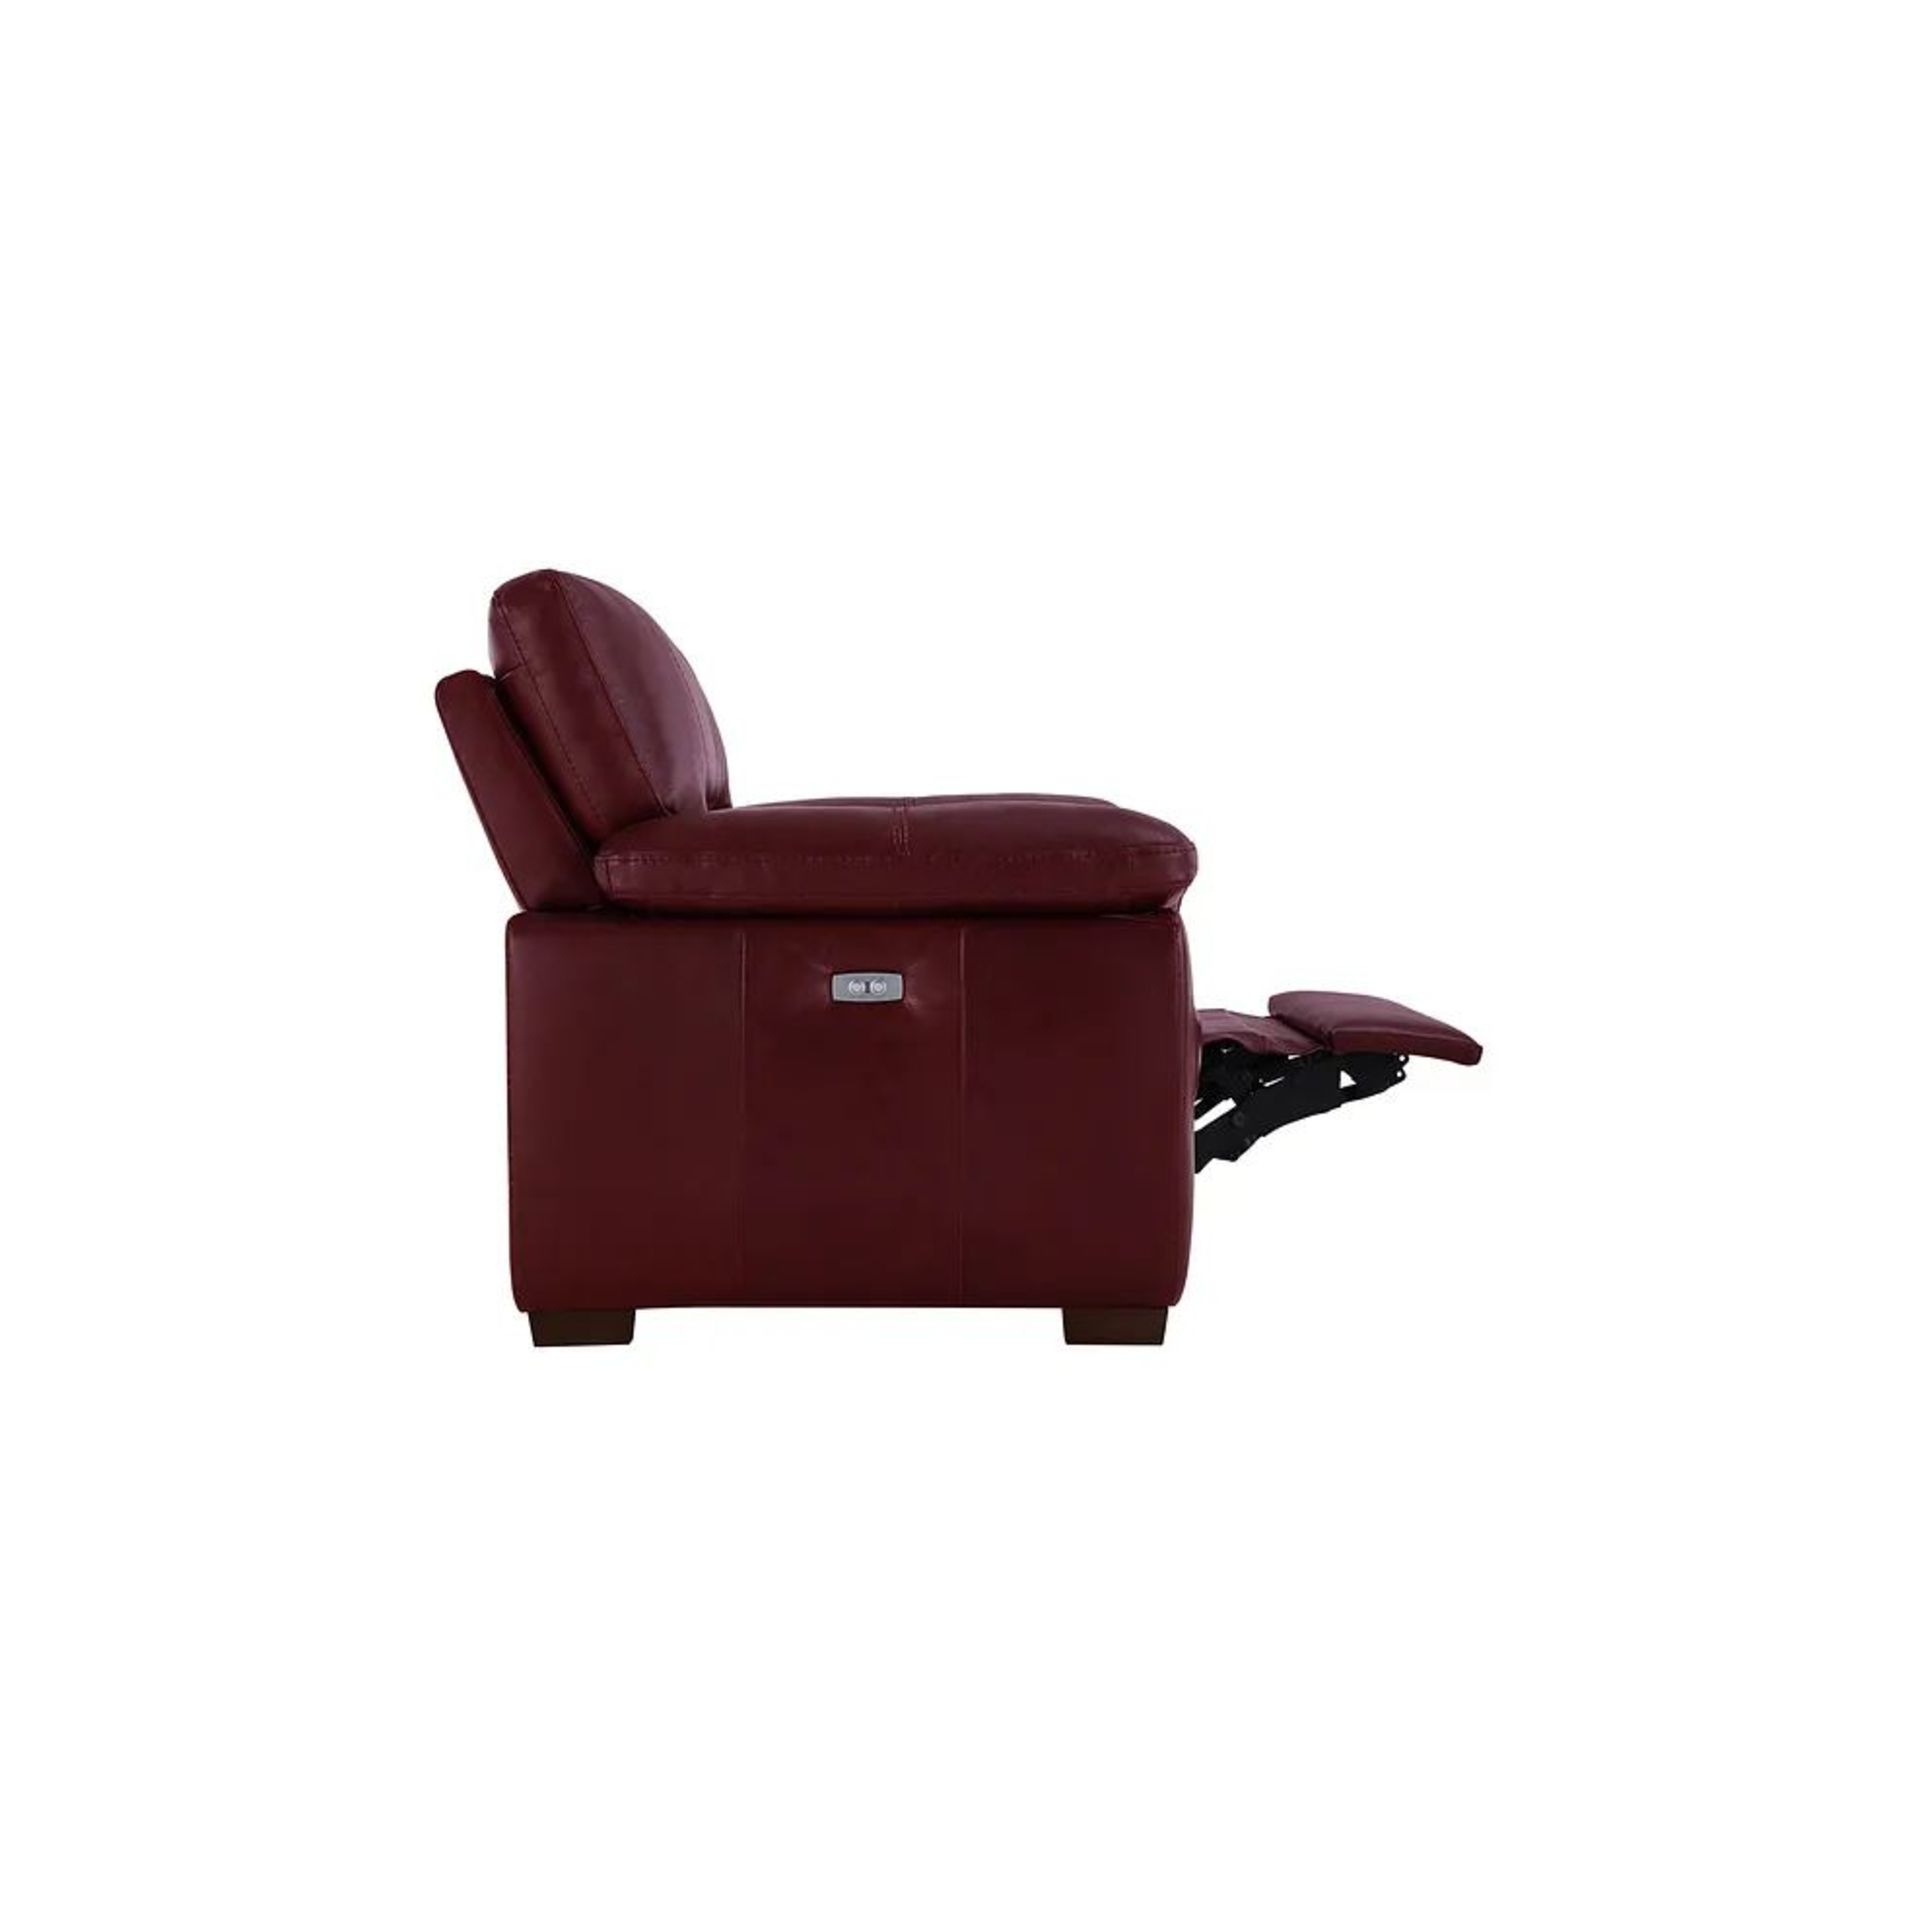 BRAND NEW ARLINGTON Electric Recliner Armchair - BURGANDY LEATHER. RRP £1199. Create a traditional - Image 7 of 12